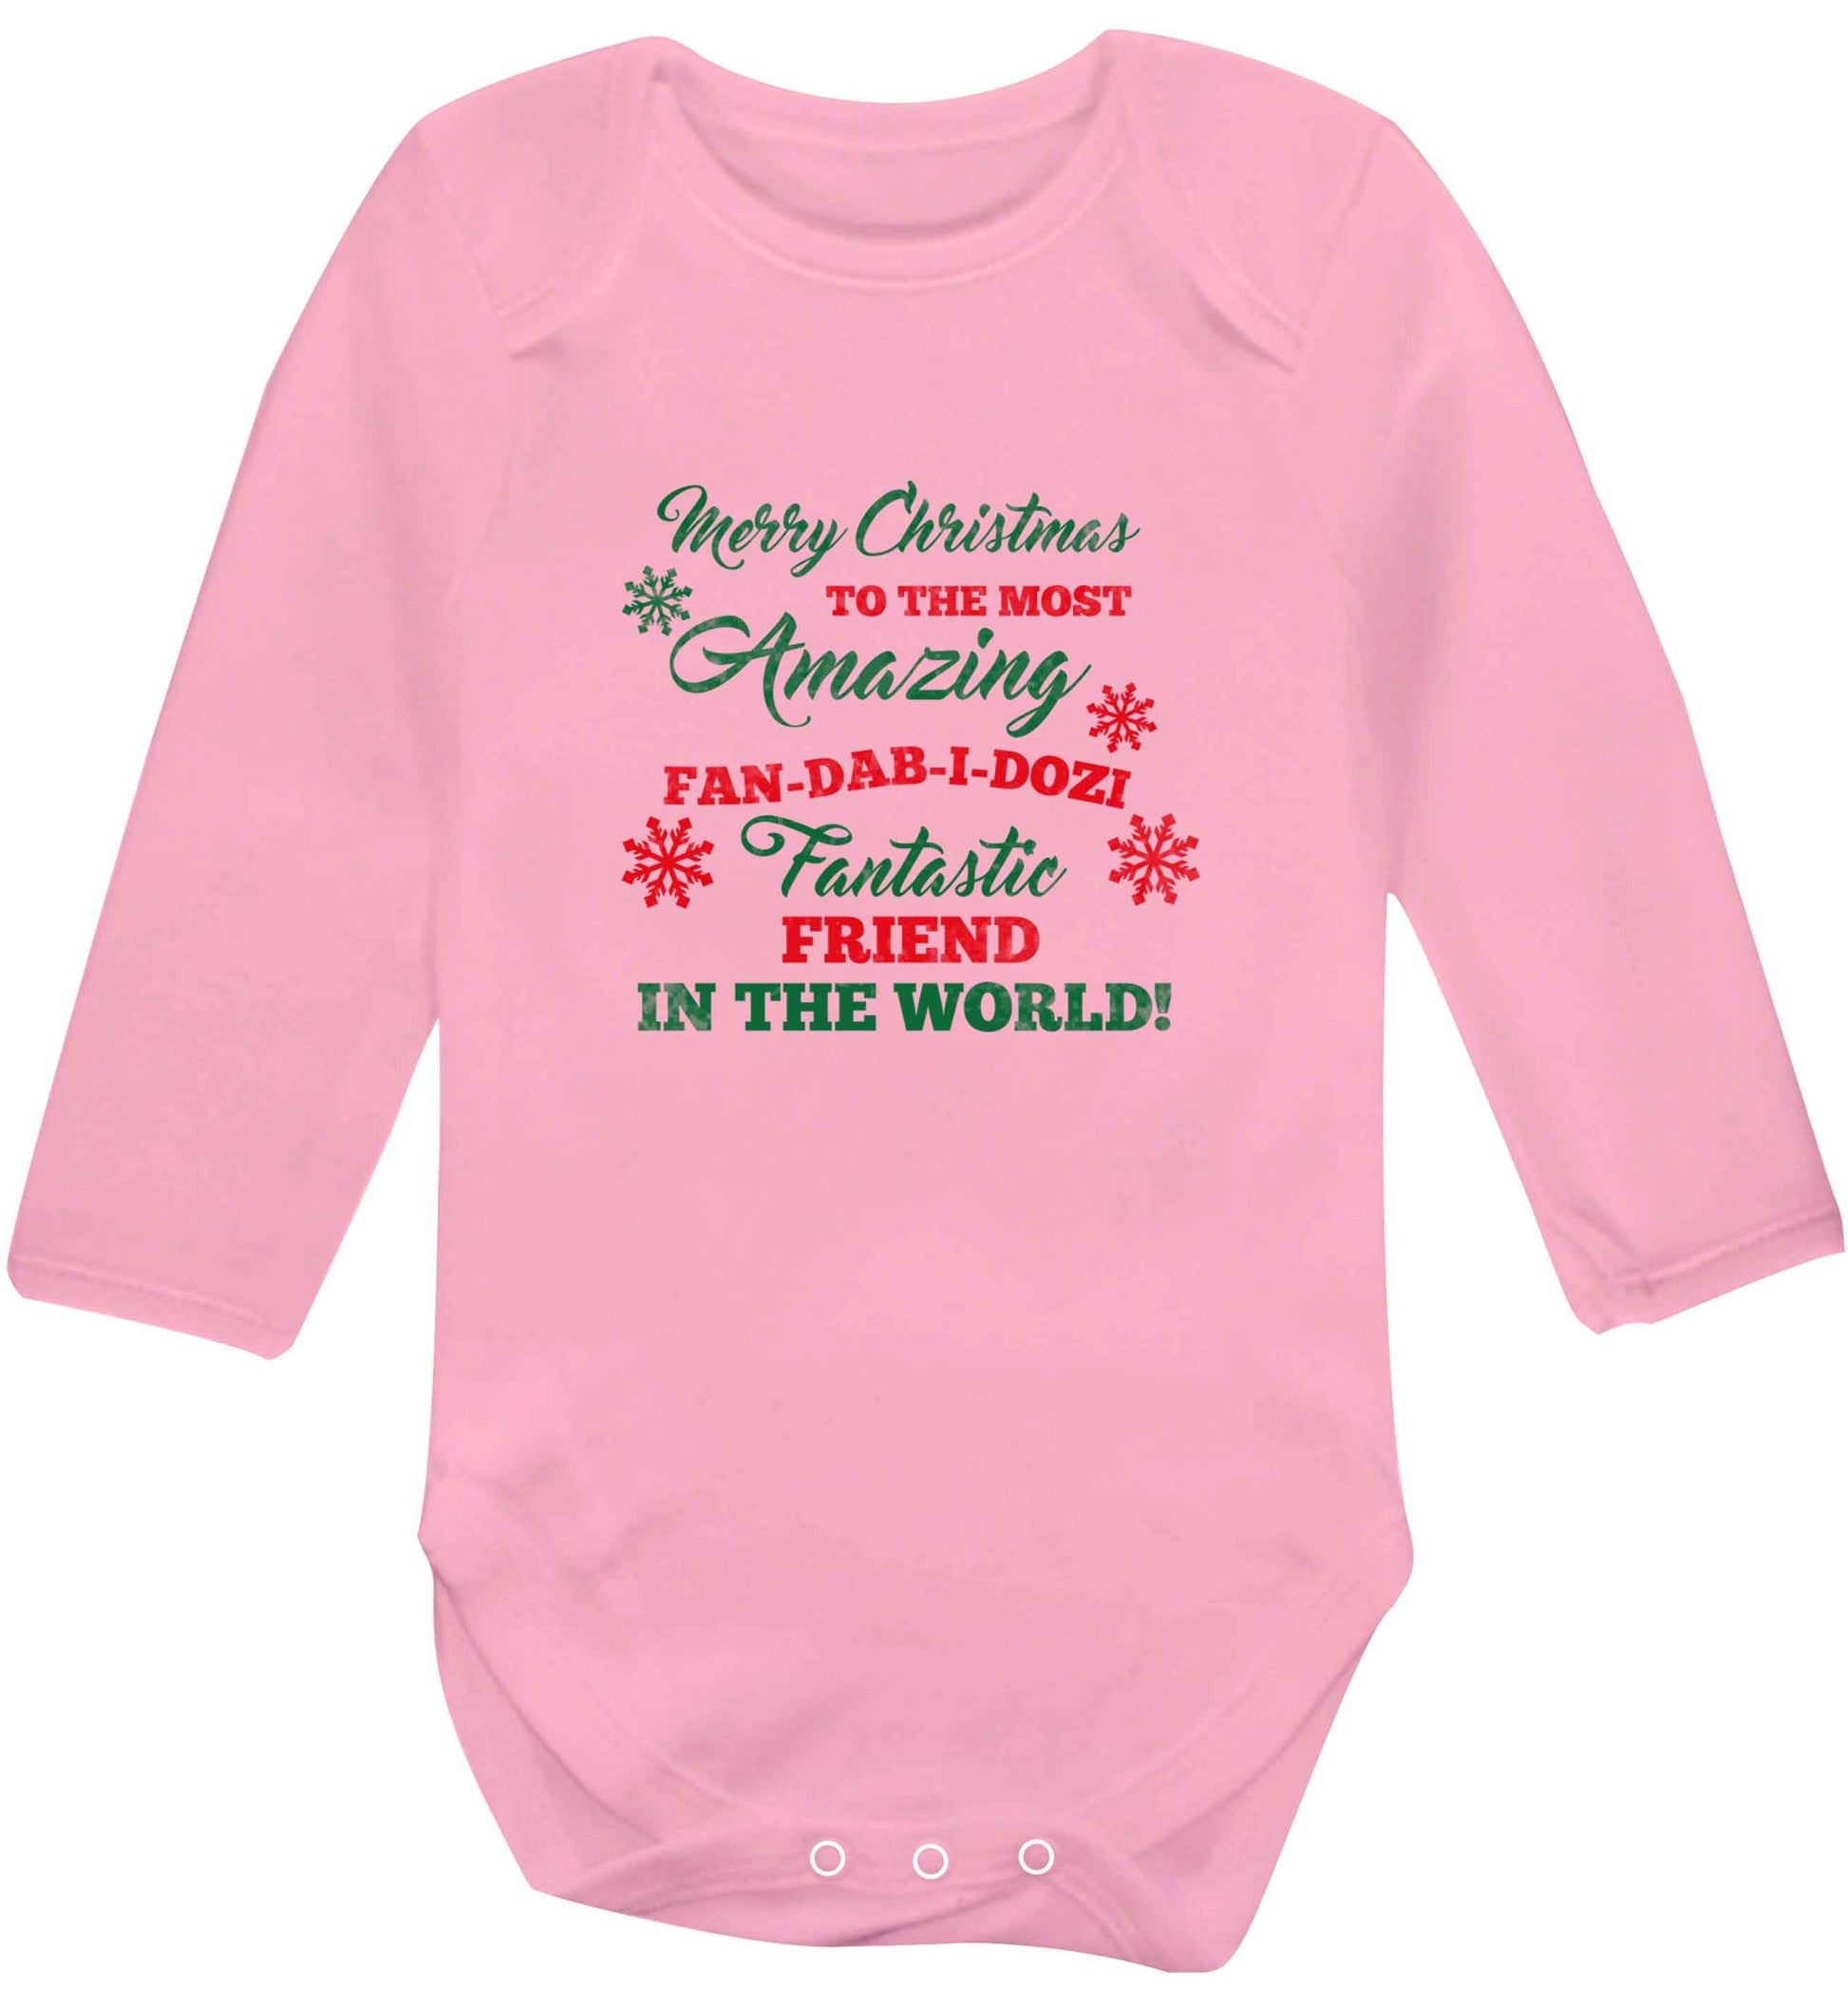 Merry Christmas to the most amazing fan-dab-i-dozi fantasic friend in the world baby vest long sleeved pale pink 6-12 months